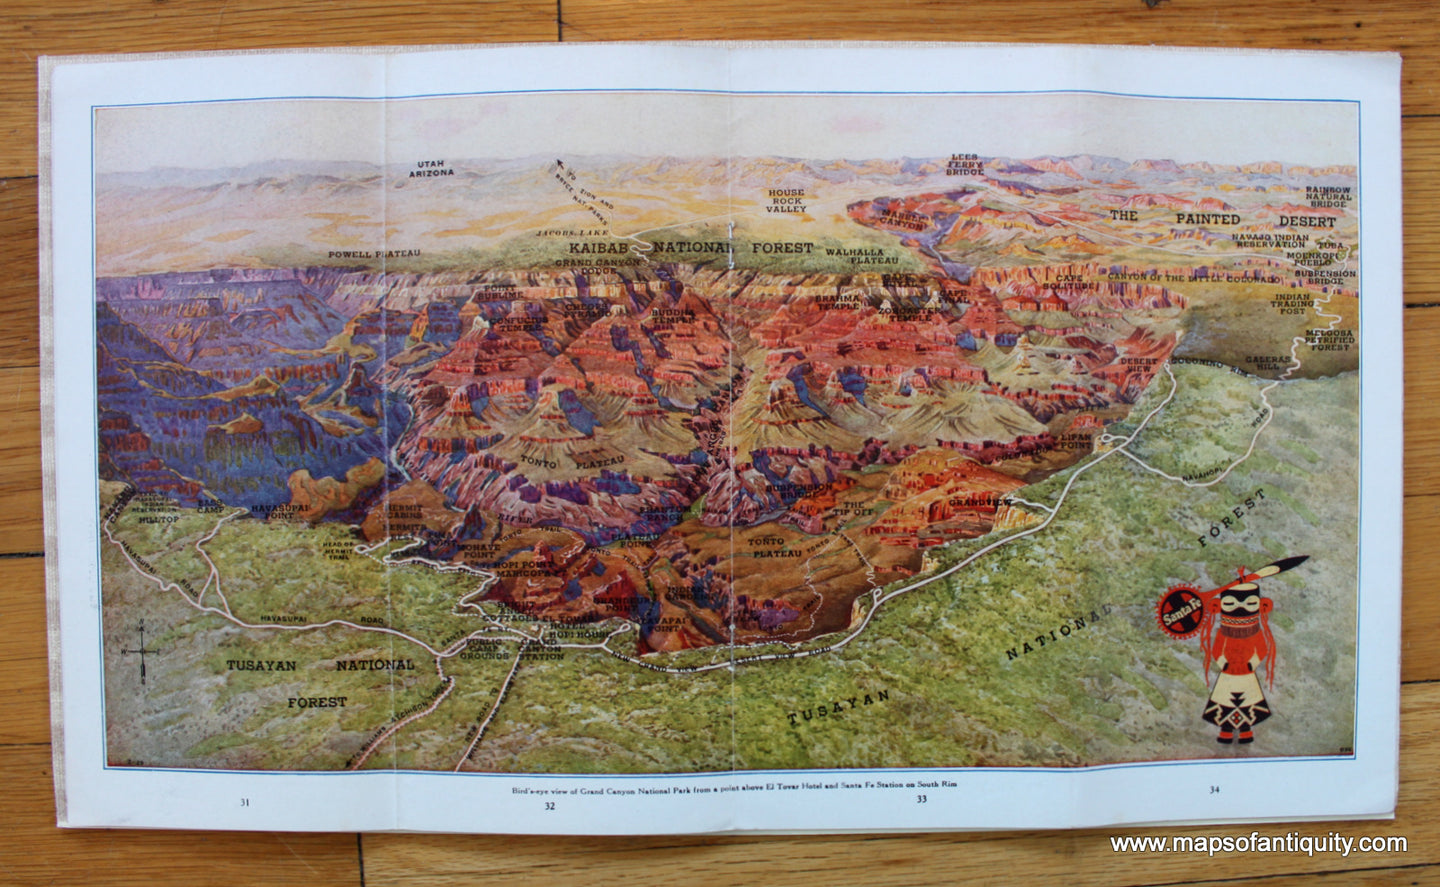 Antique-Printed-Color-Map-Grand-Canyon-Outings-Santa-Fe-Railroad-Map-******-United-States-West-1930-Rand-McNally-Maps-Of-Antiquity